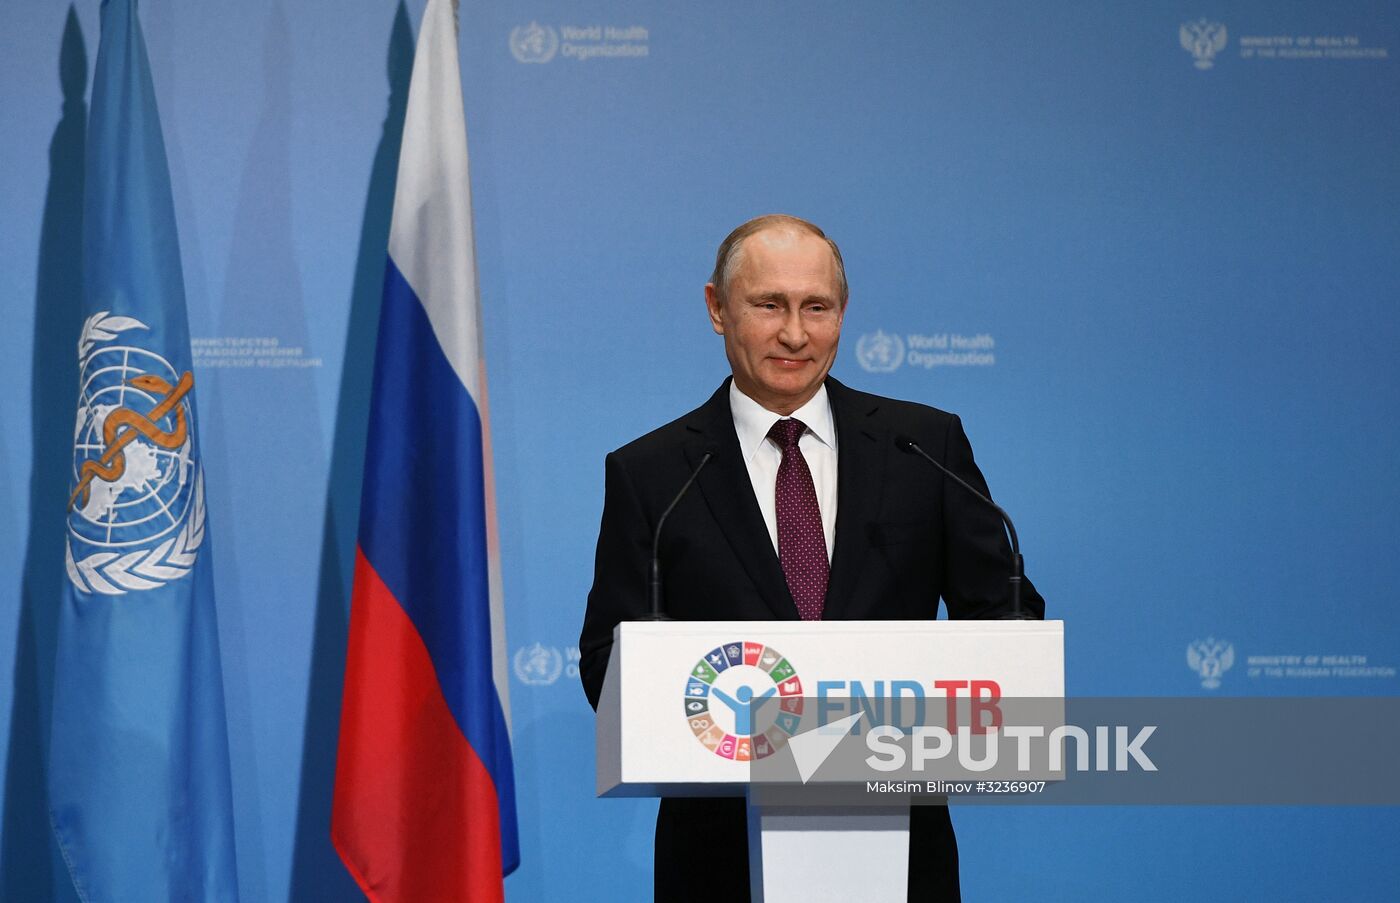 Russian President Vladimir Putin attends WHO Global Ministerial Conference